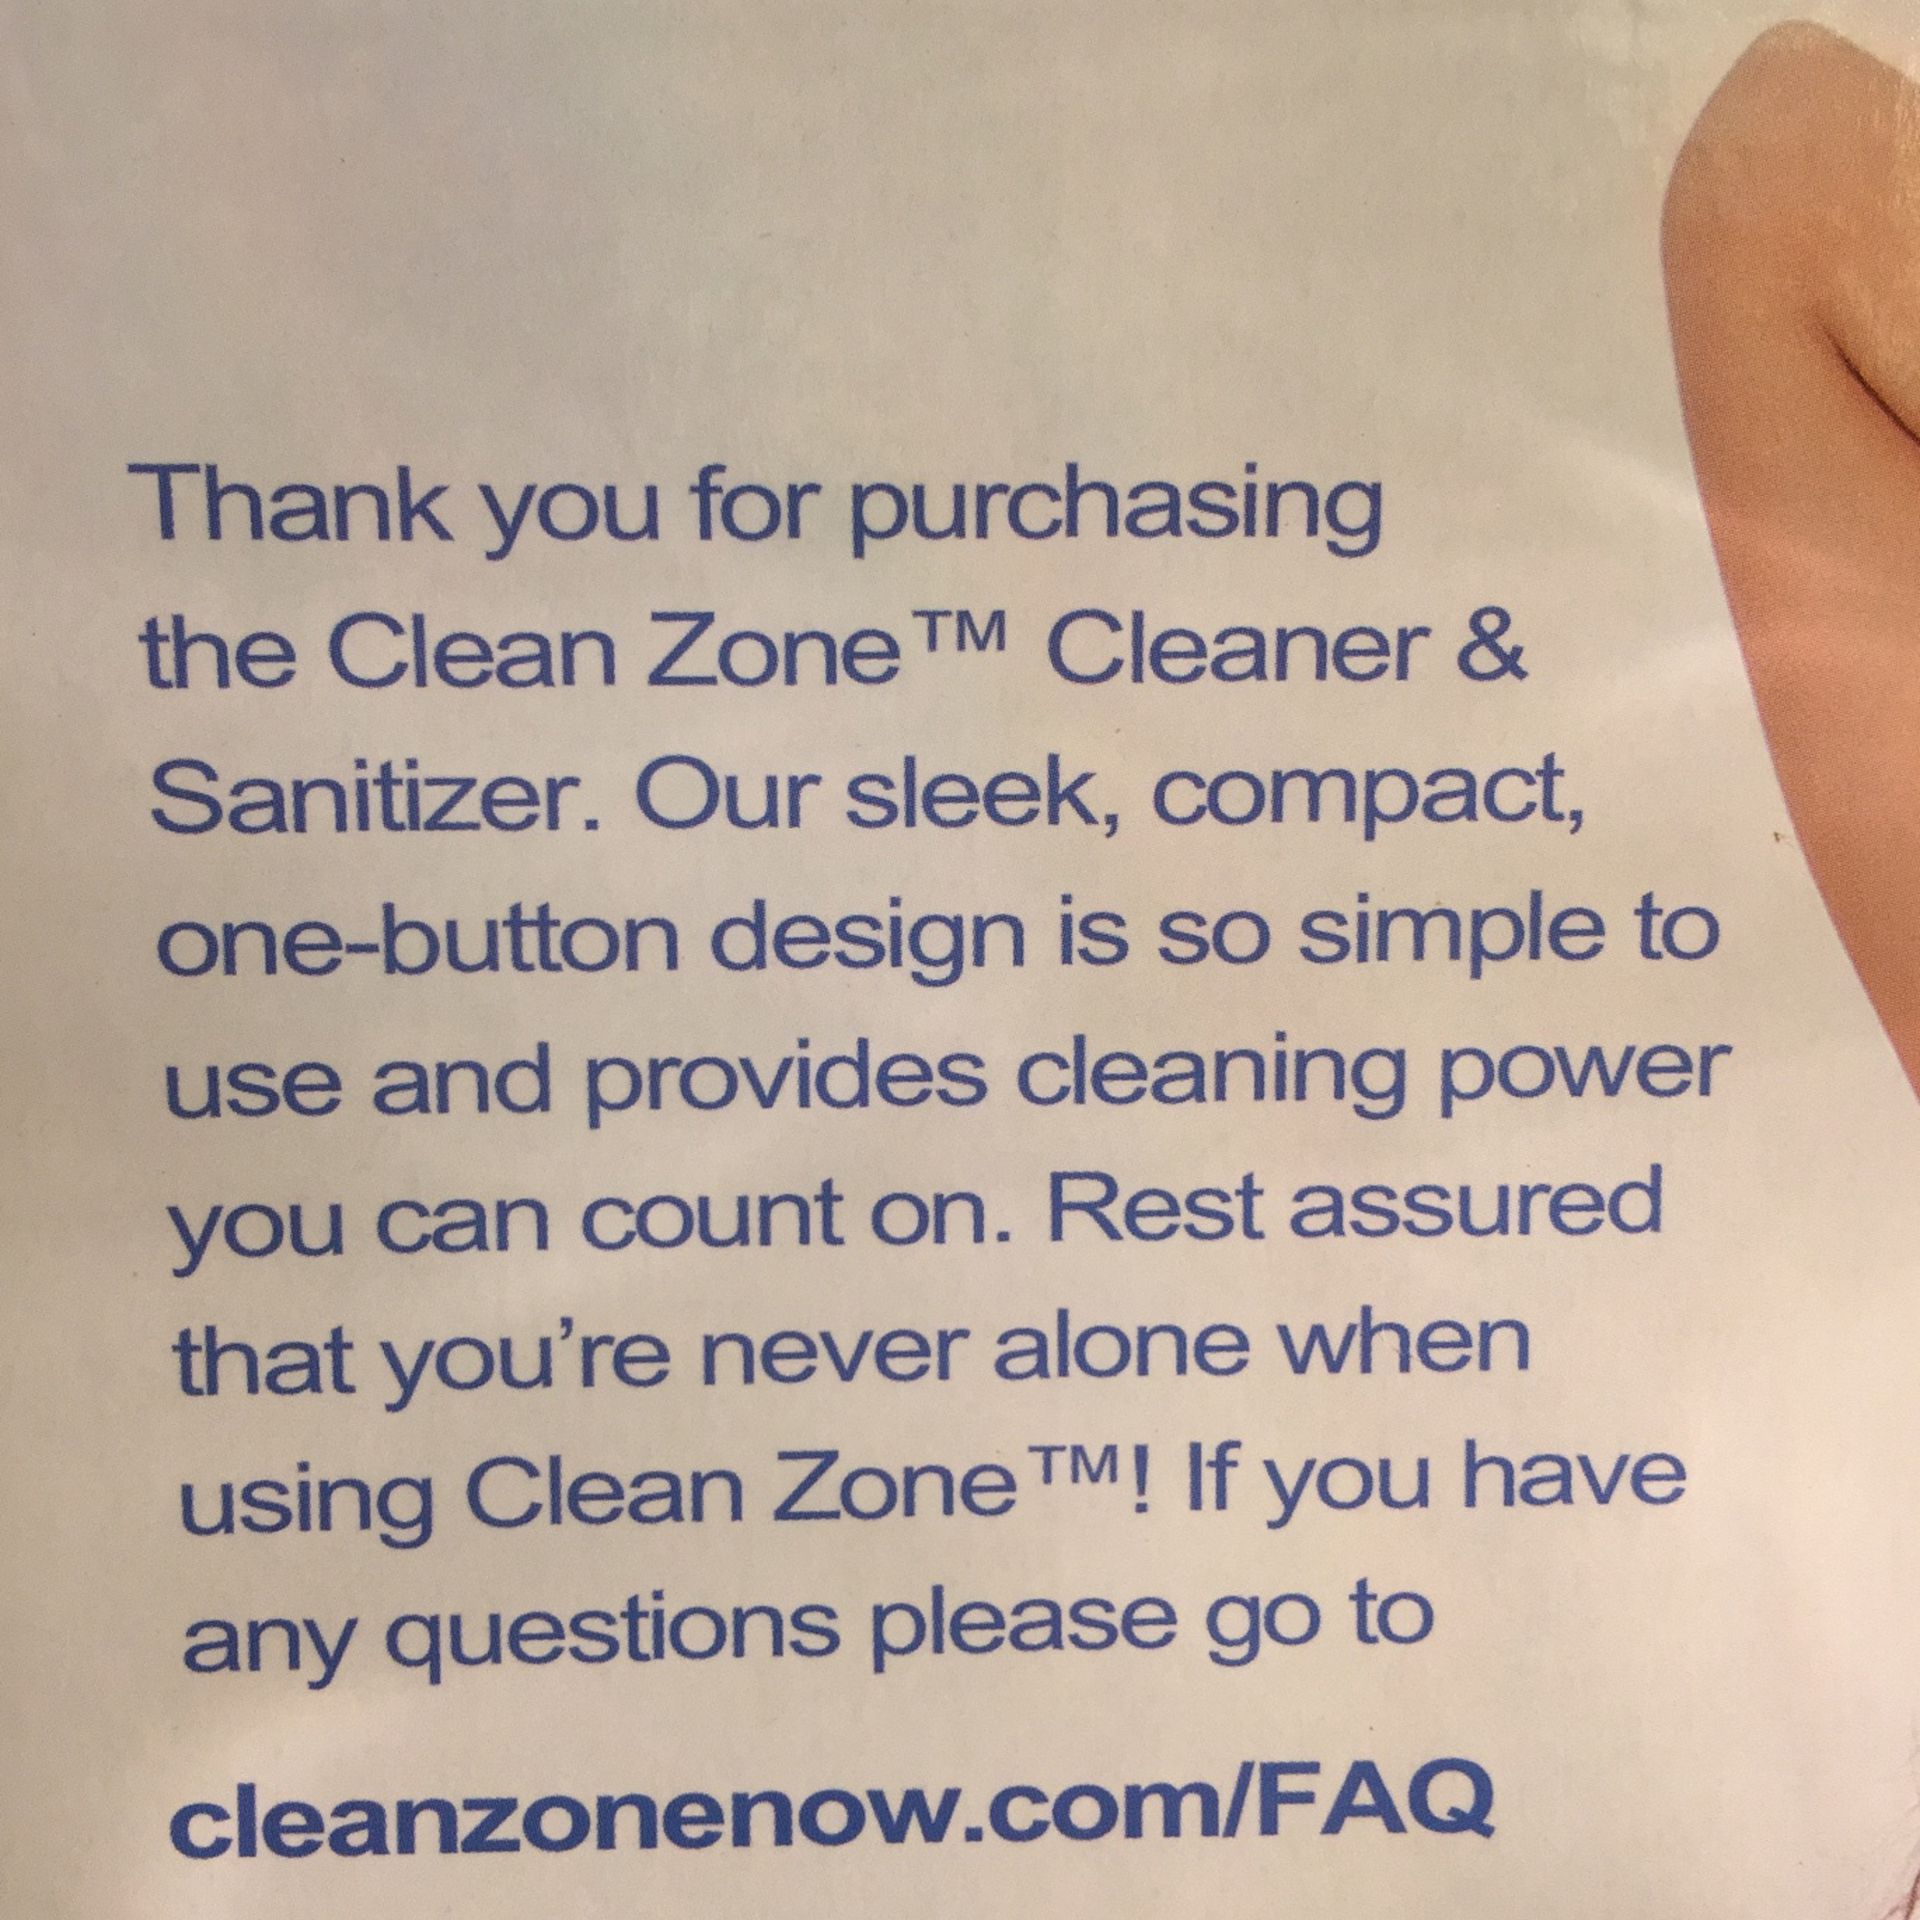 NEW CPAP CLEANZONE CLEANING MACHINE UNUSED